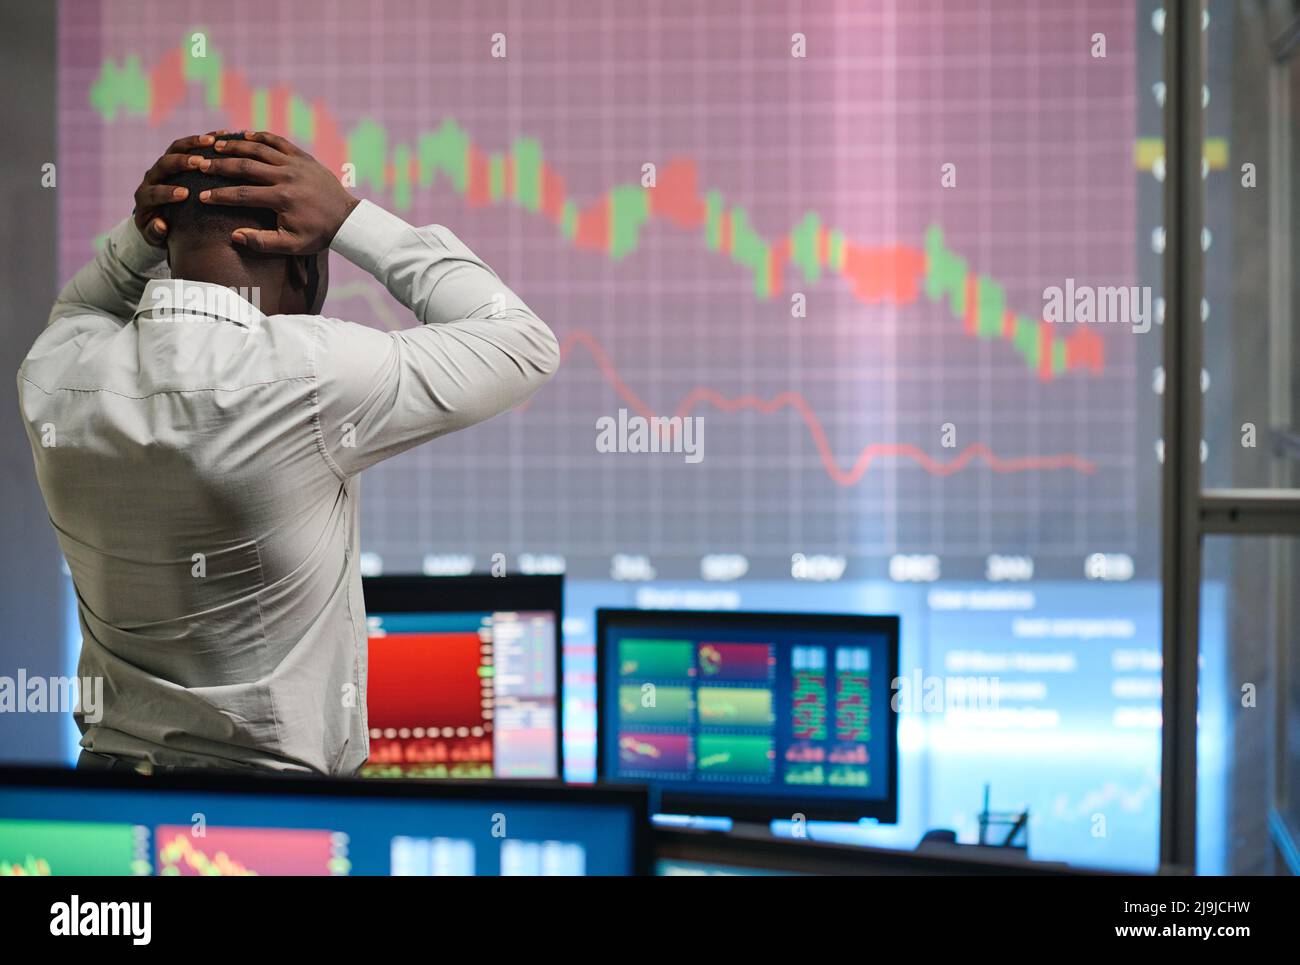 Unrecognizable Black man wearing white shirt working in stock trading company looking at graph decreasing and feeling disappointment Stock Photo